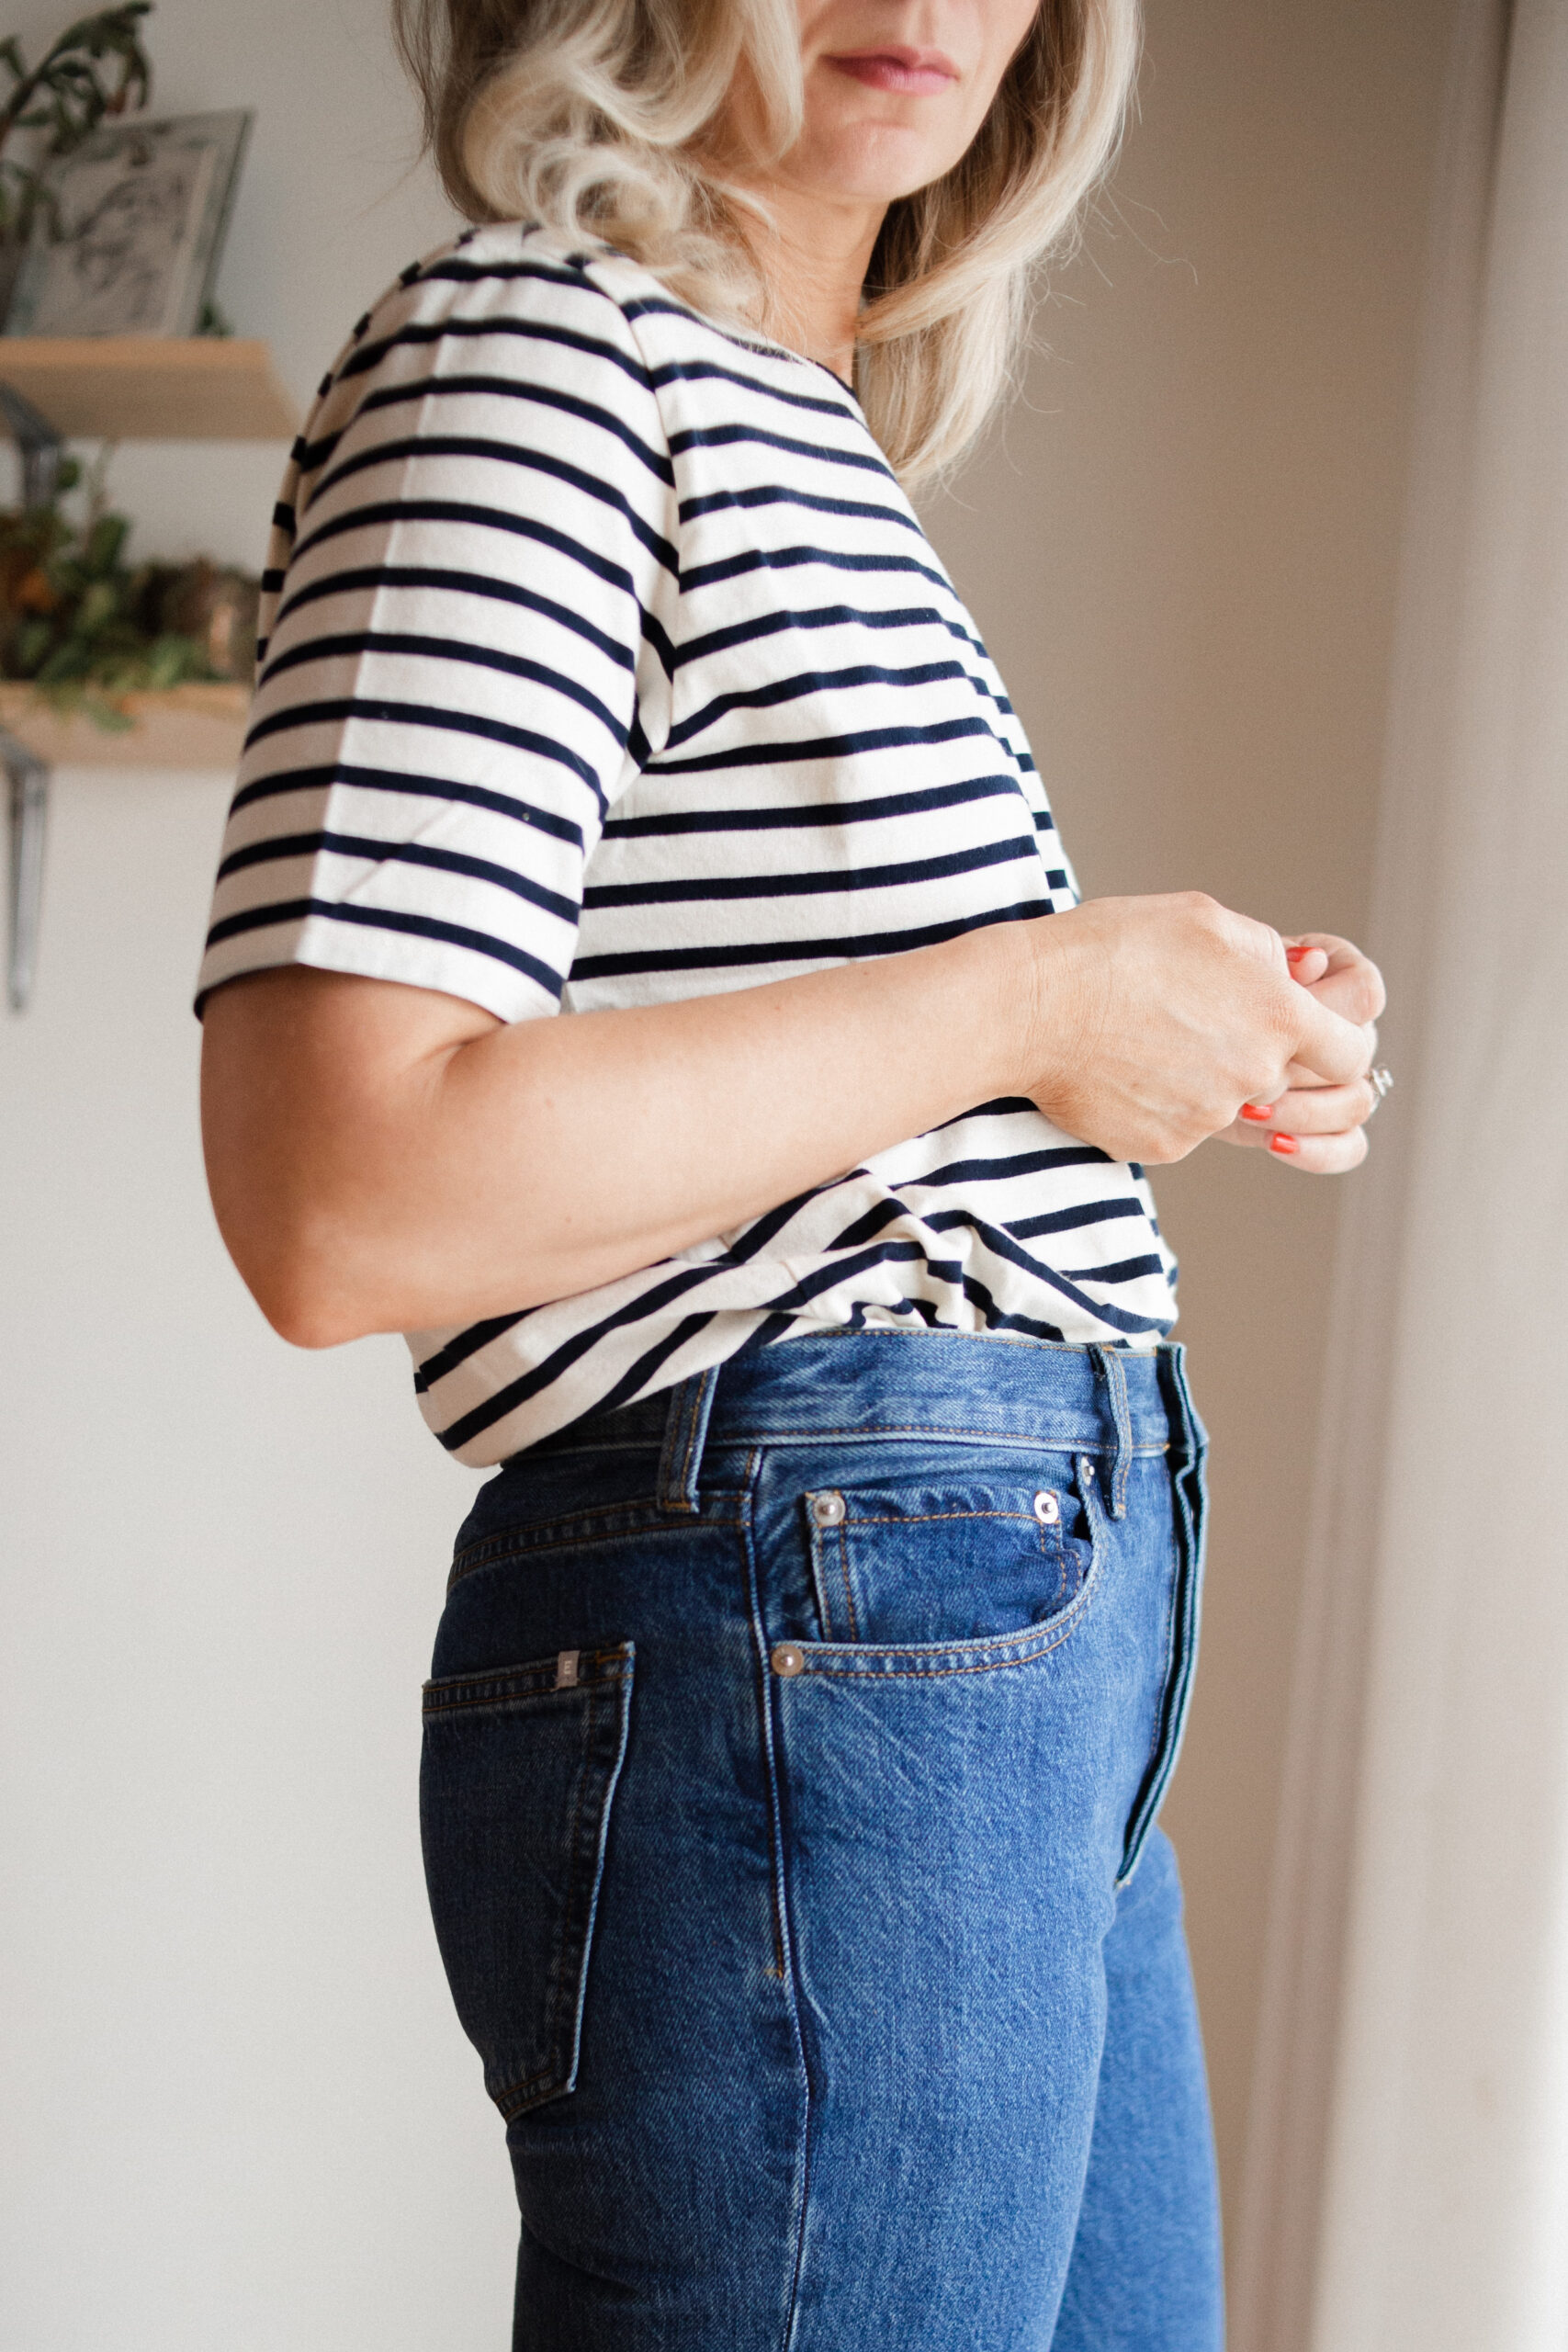 Karin Emily wears the Everlane everyone vintage jeans and a black and white tee